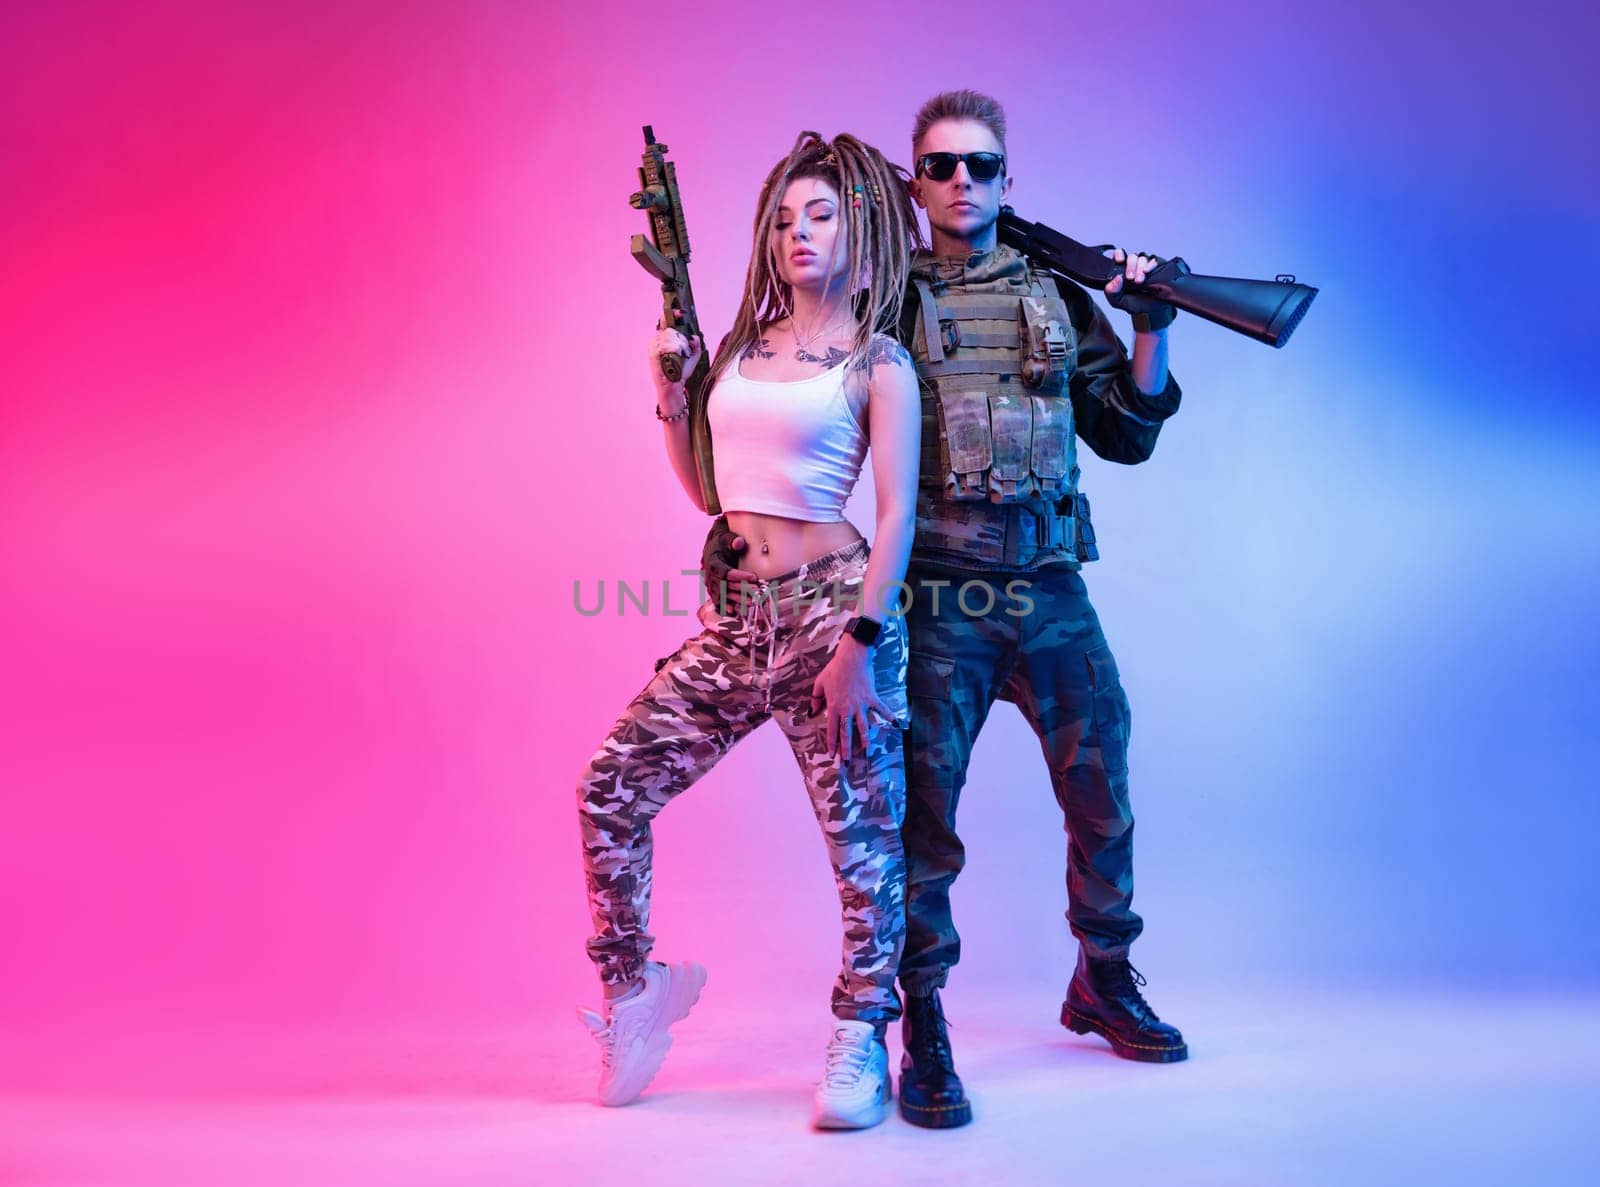 A daring stylish girl with an automatic rifle and a guy in military clothes with an airsoft gun in neon light on a bright neon background pose fashionably